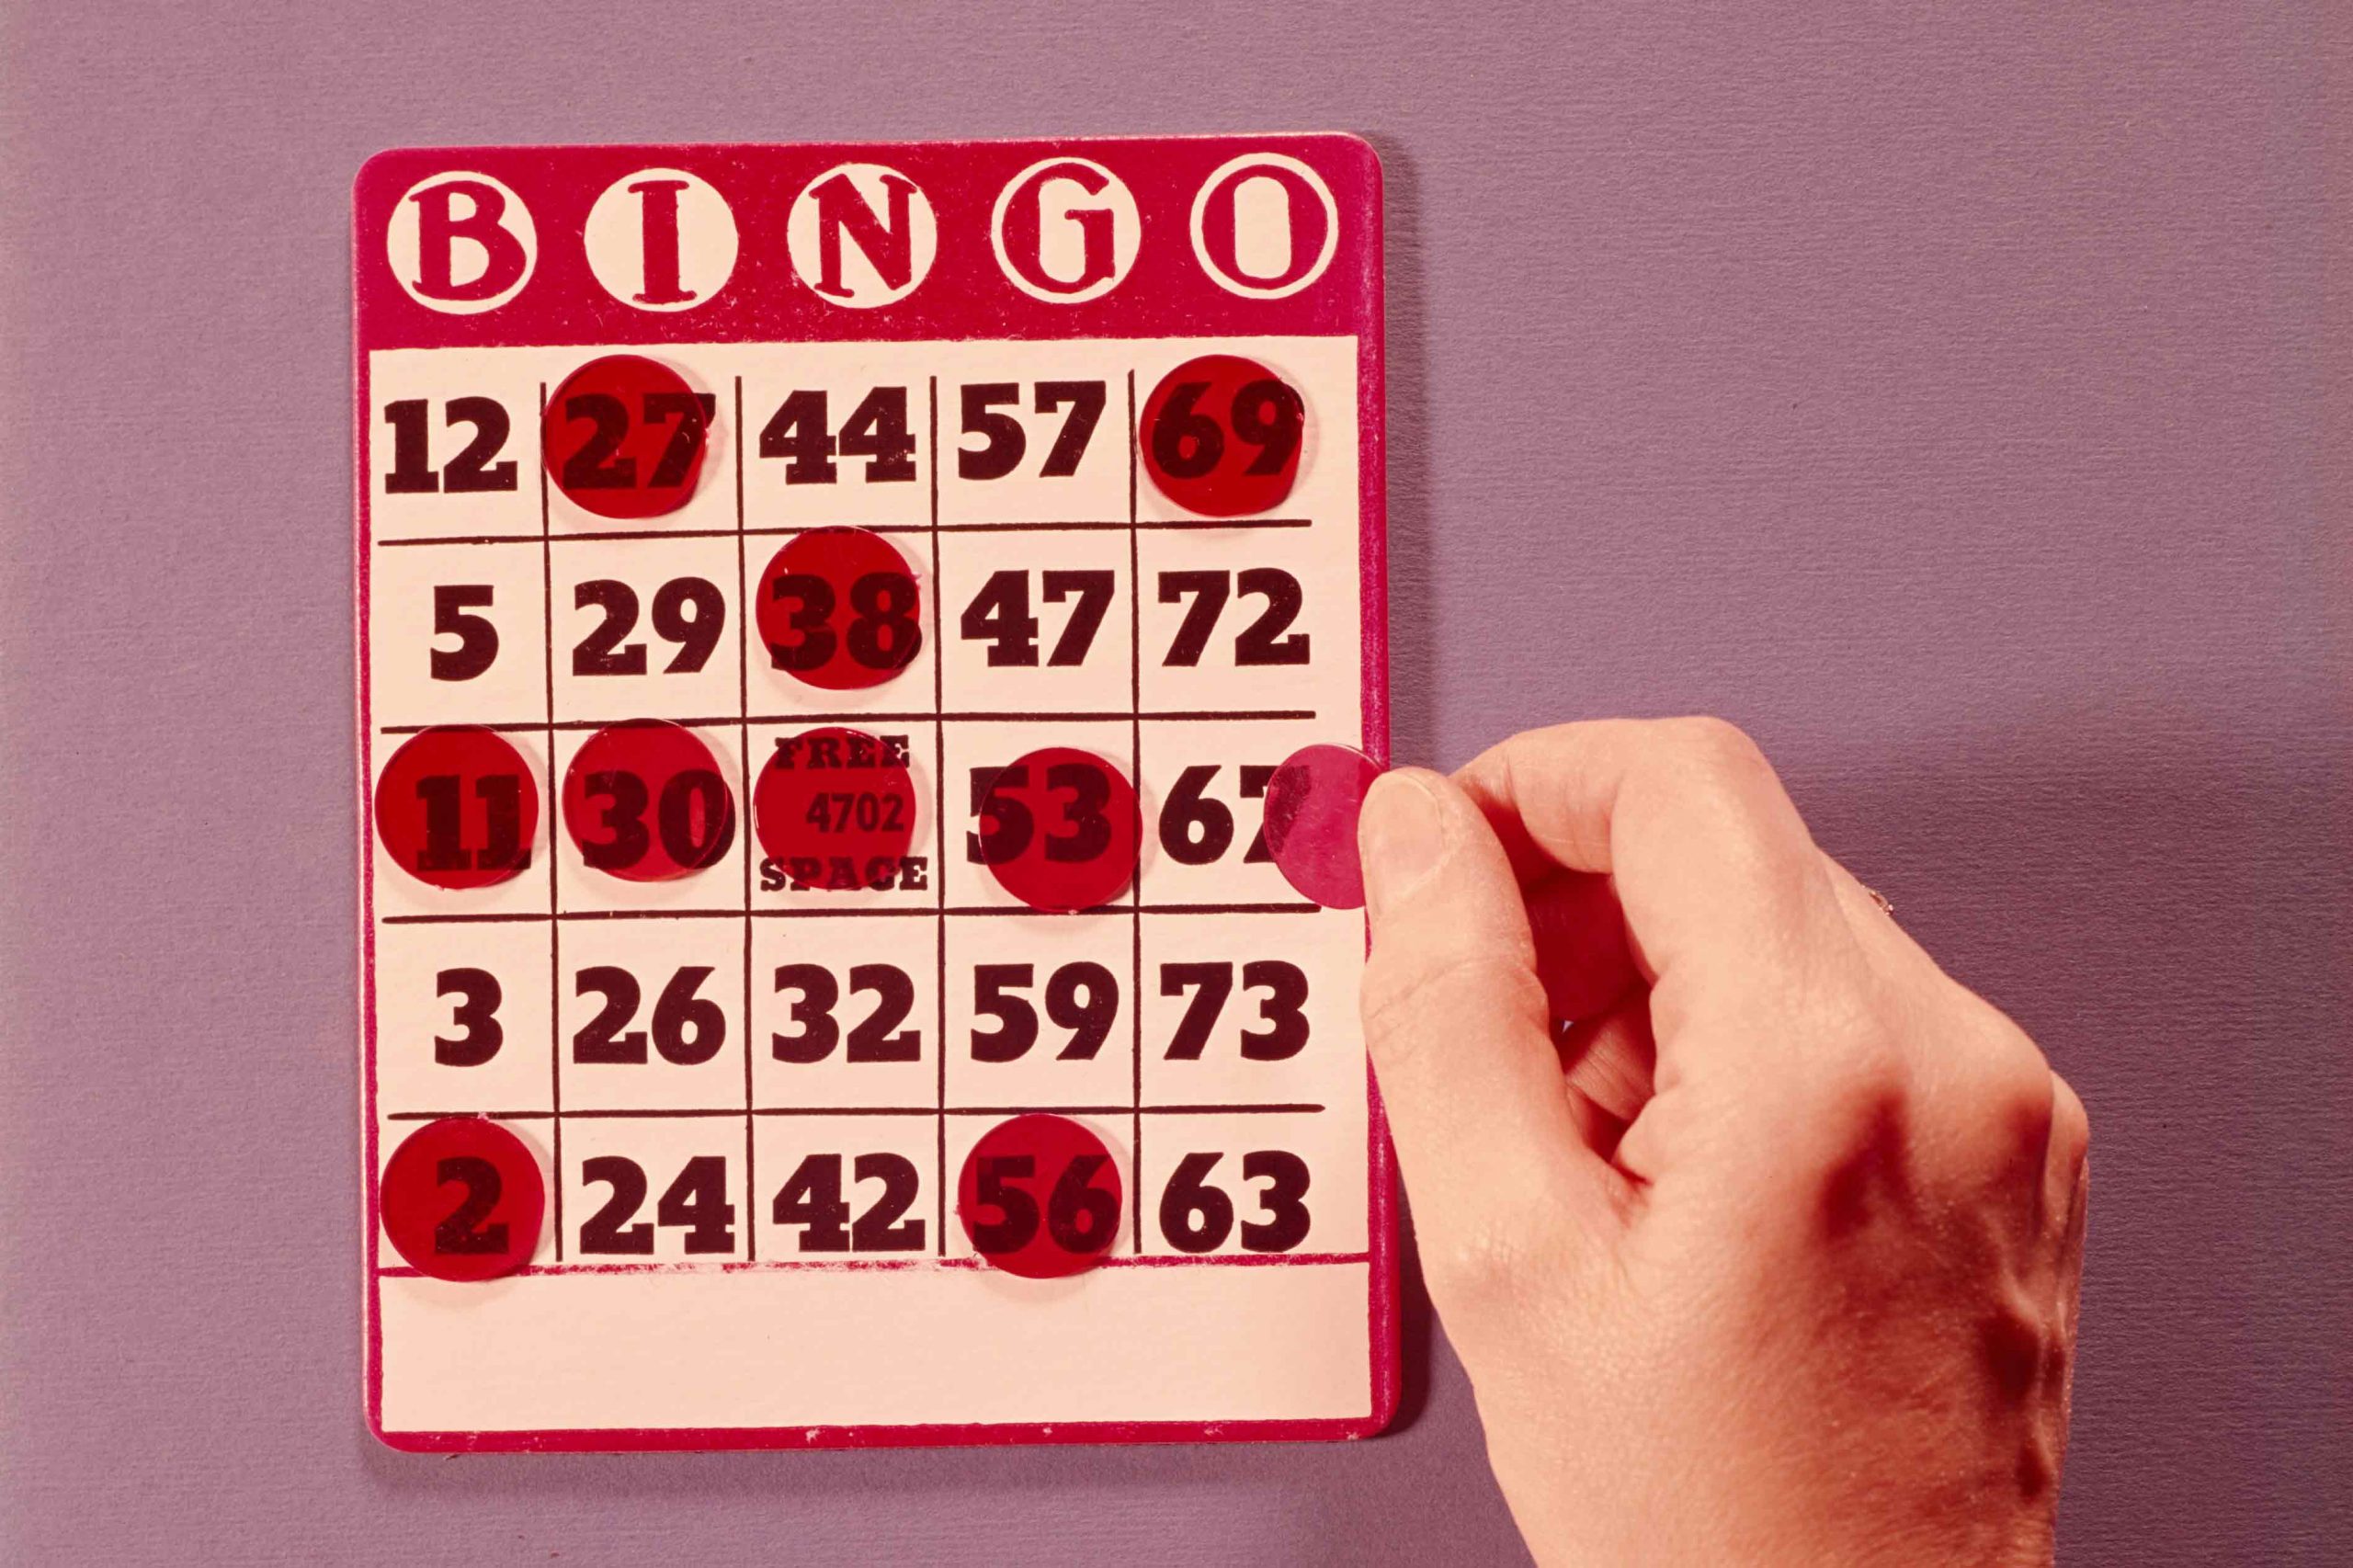 What Was The Original Name Of The Game Bingo?